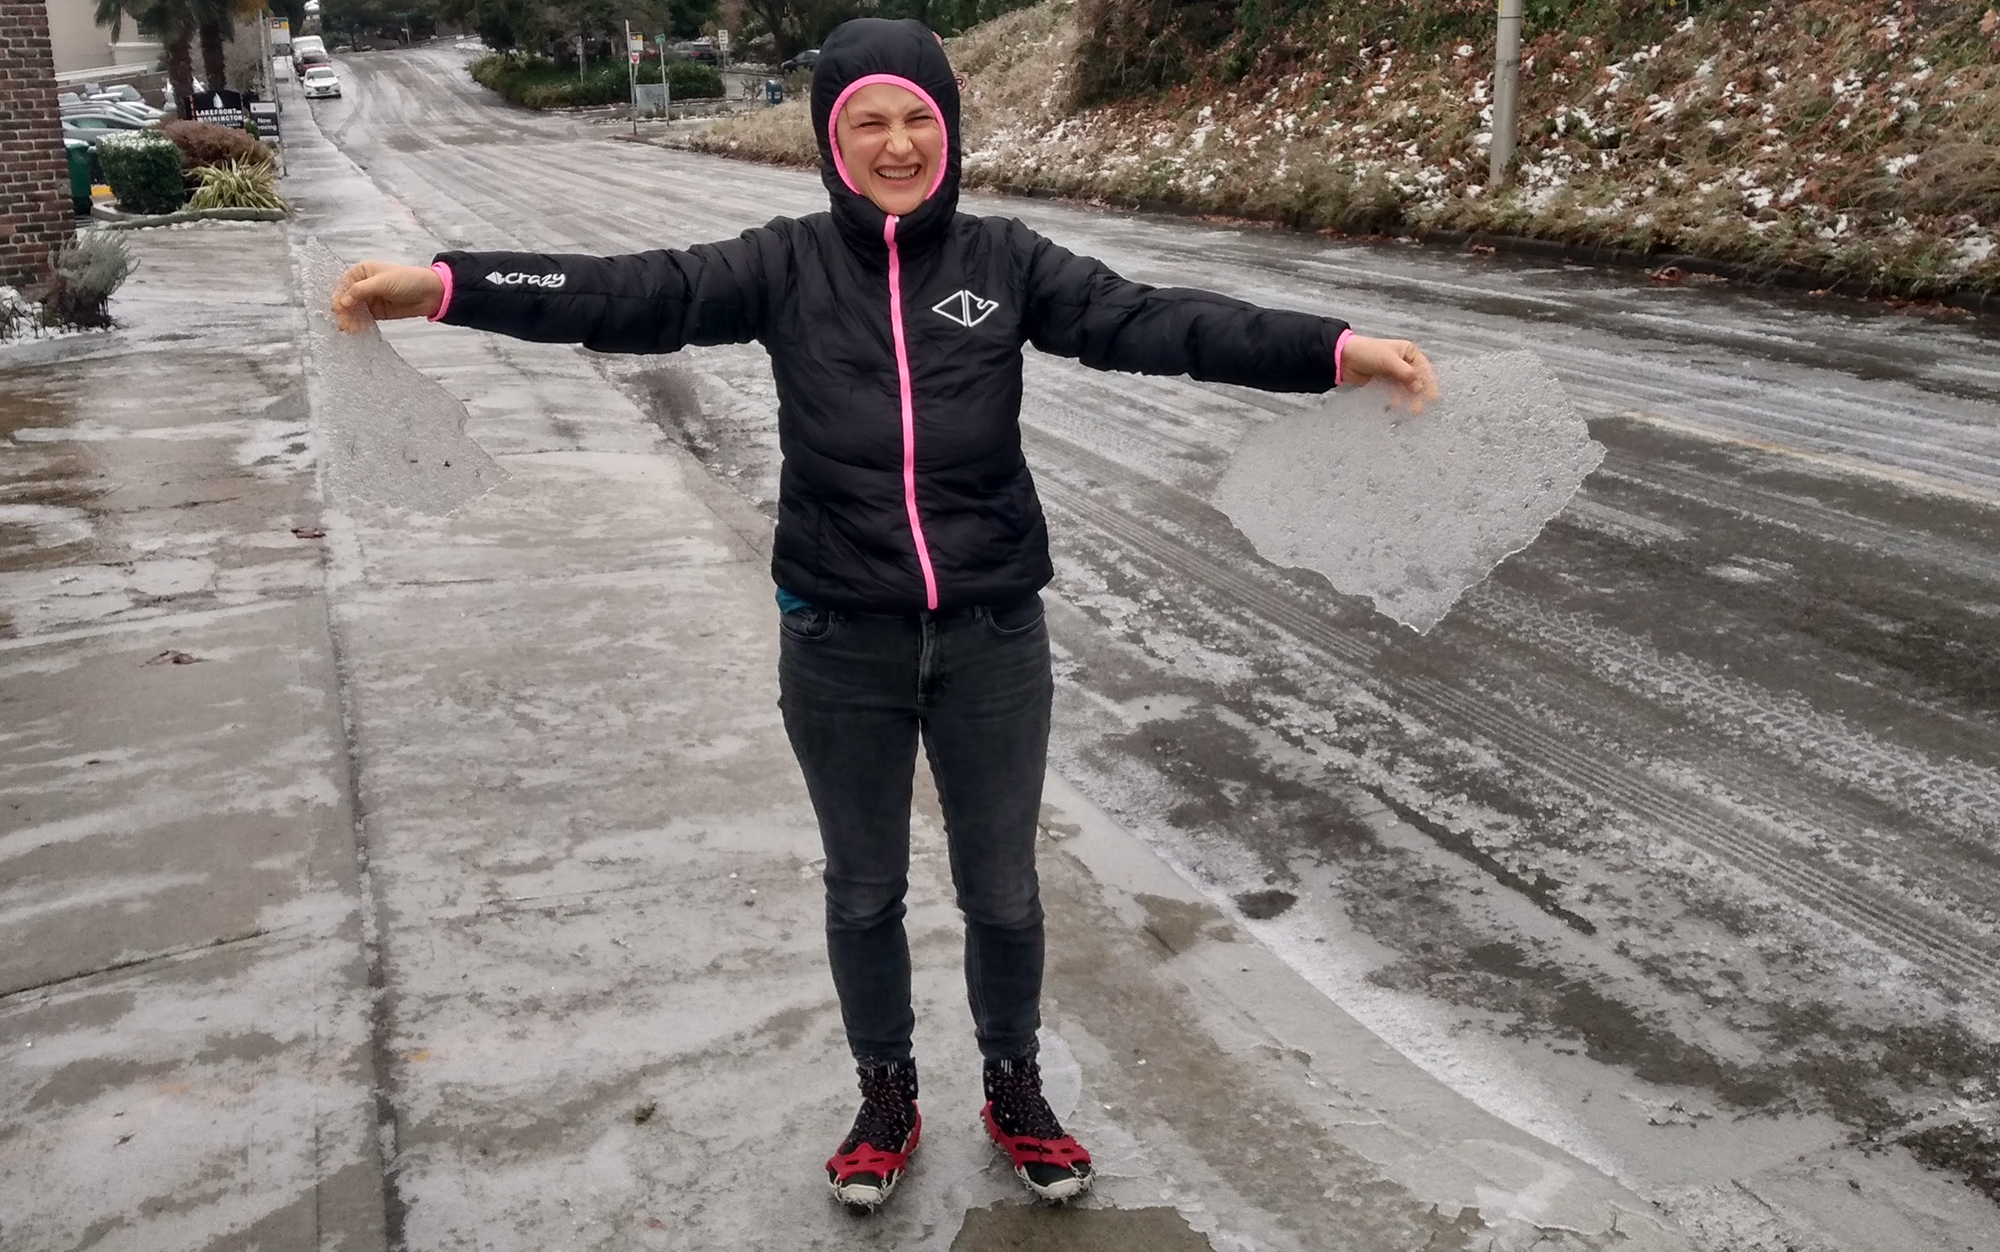 The Crazy Levity easily covered my entire torso, arms, and head—a feature I appreciated while exploring my local neighborhood the day after an ice storm. 